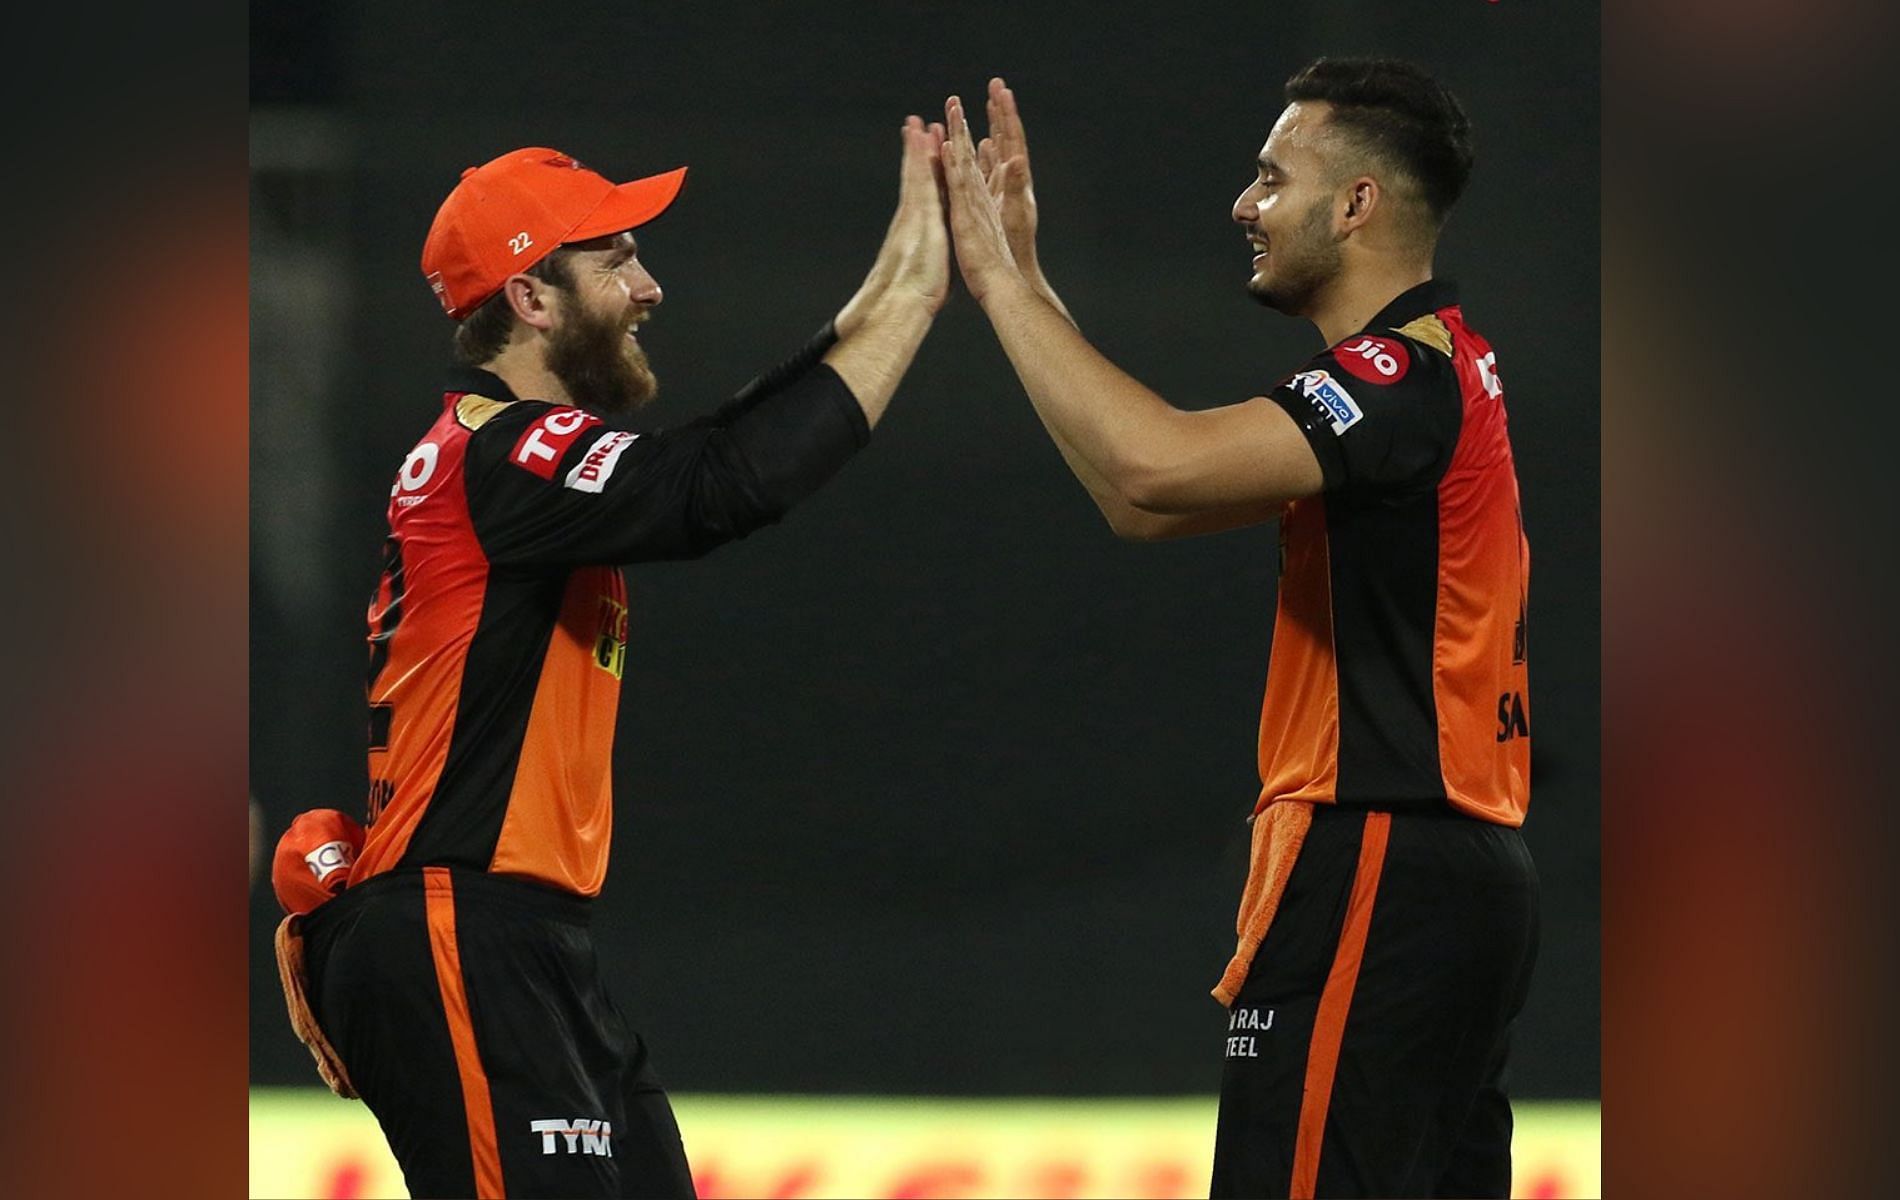 Kane Williamson and Abdul Samad were retained by SRH ahead of the IPL 2022 auction.